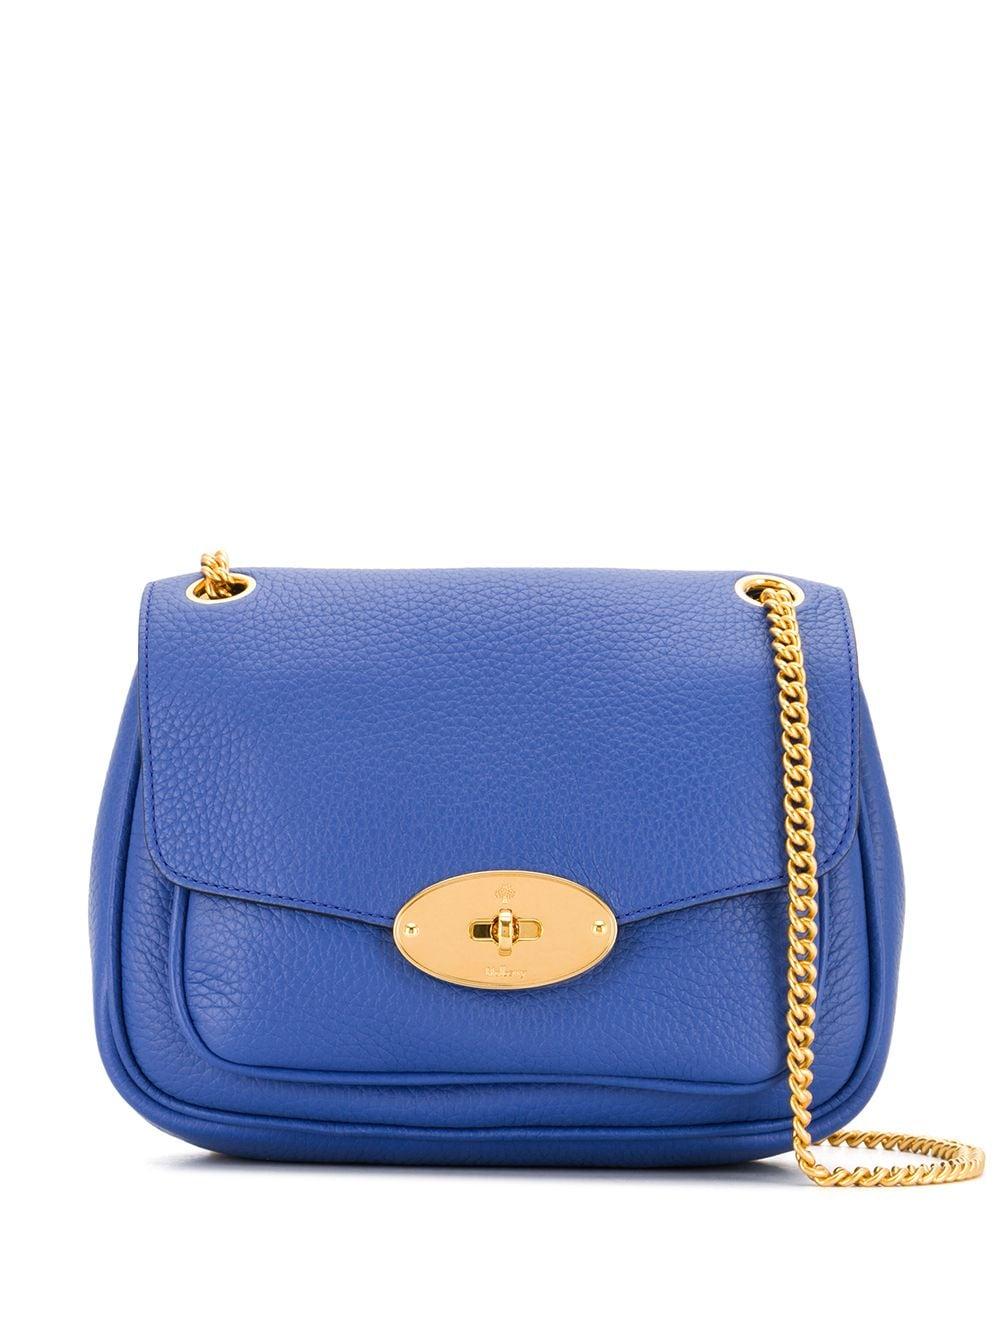 Sale > darley mulberry purse > in stock